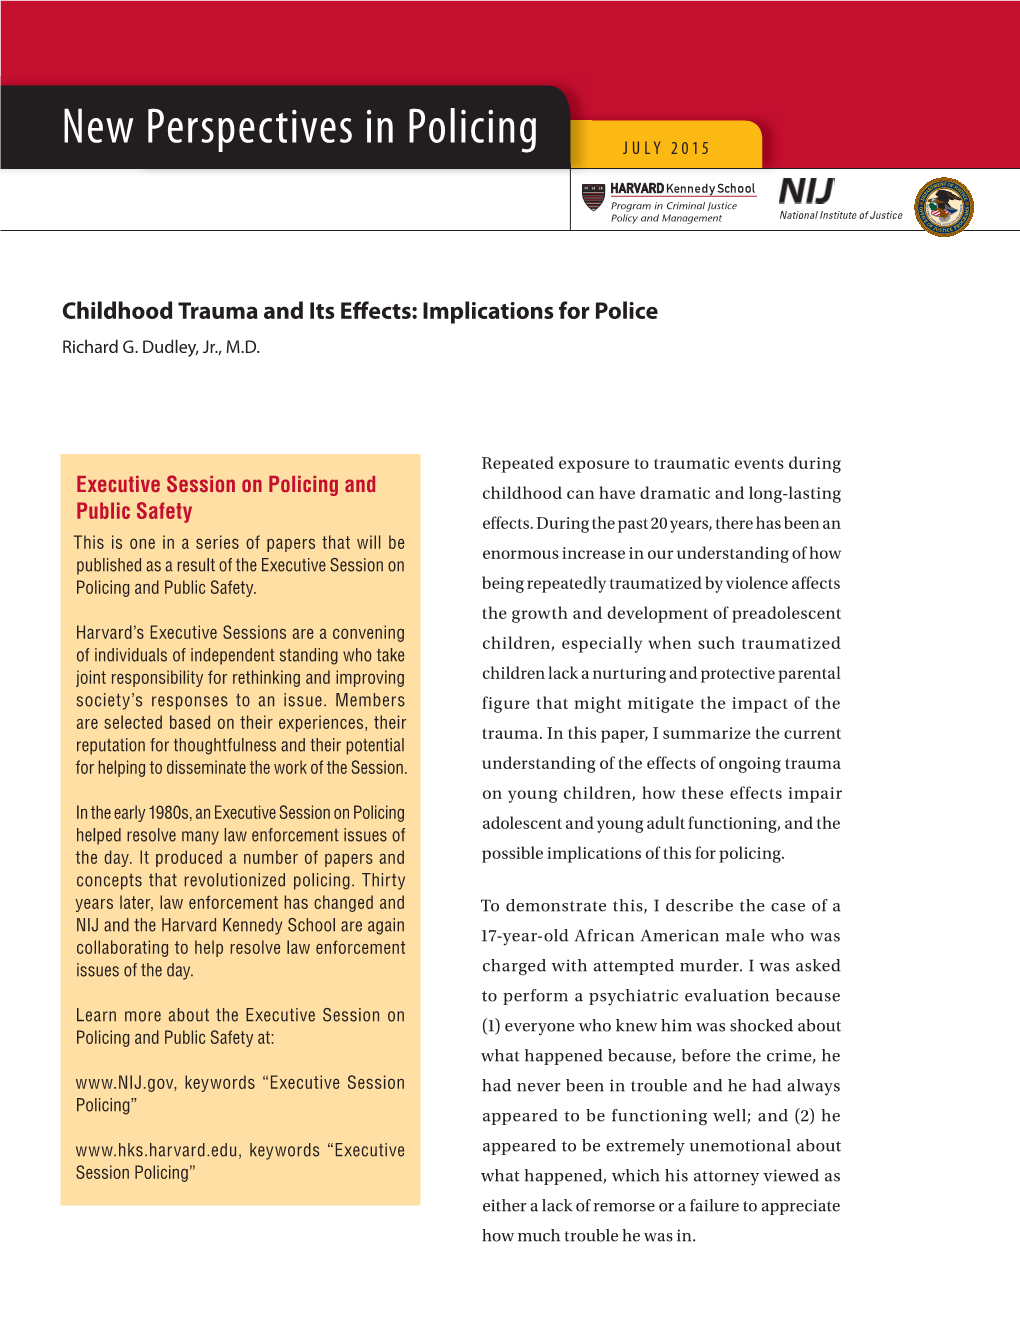 Childhood Trauma and Its Effects: Implications for Police